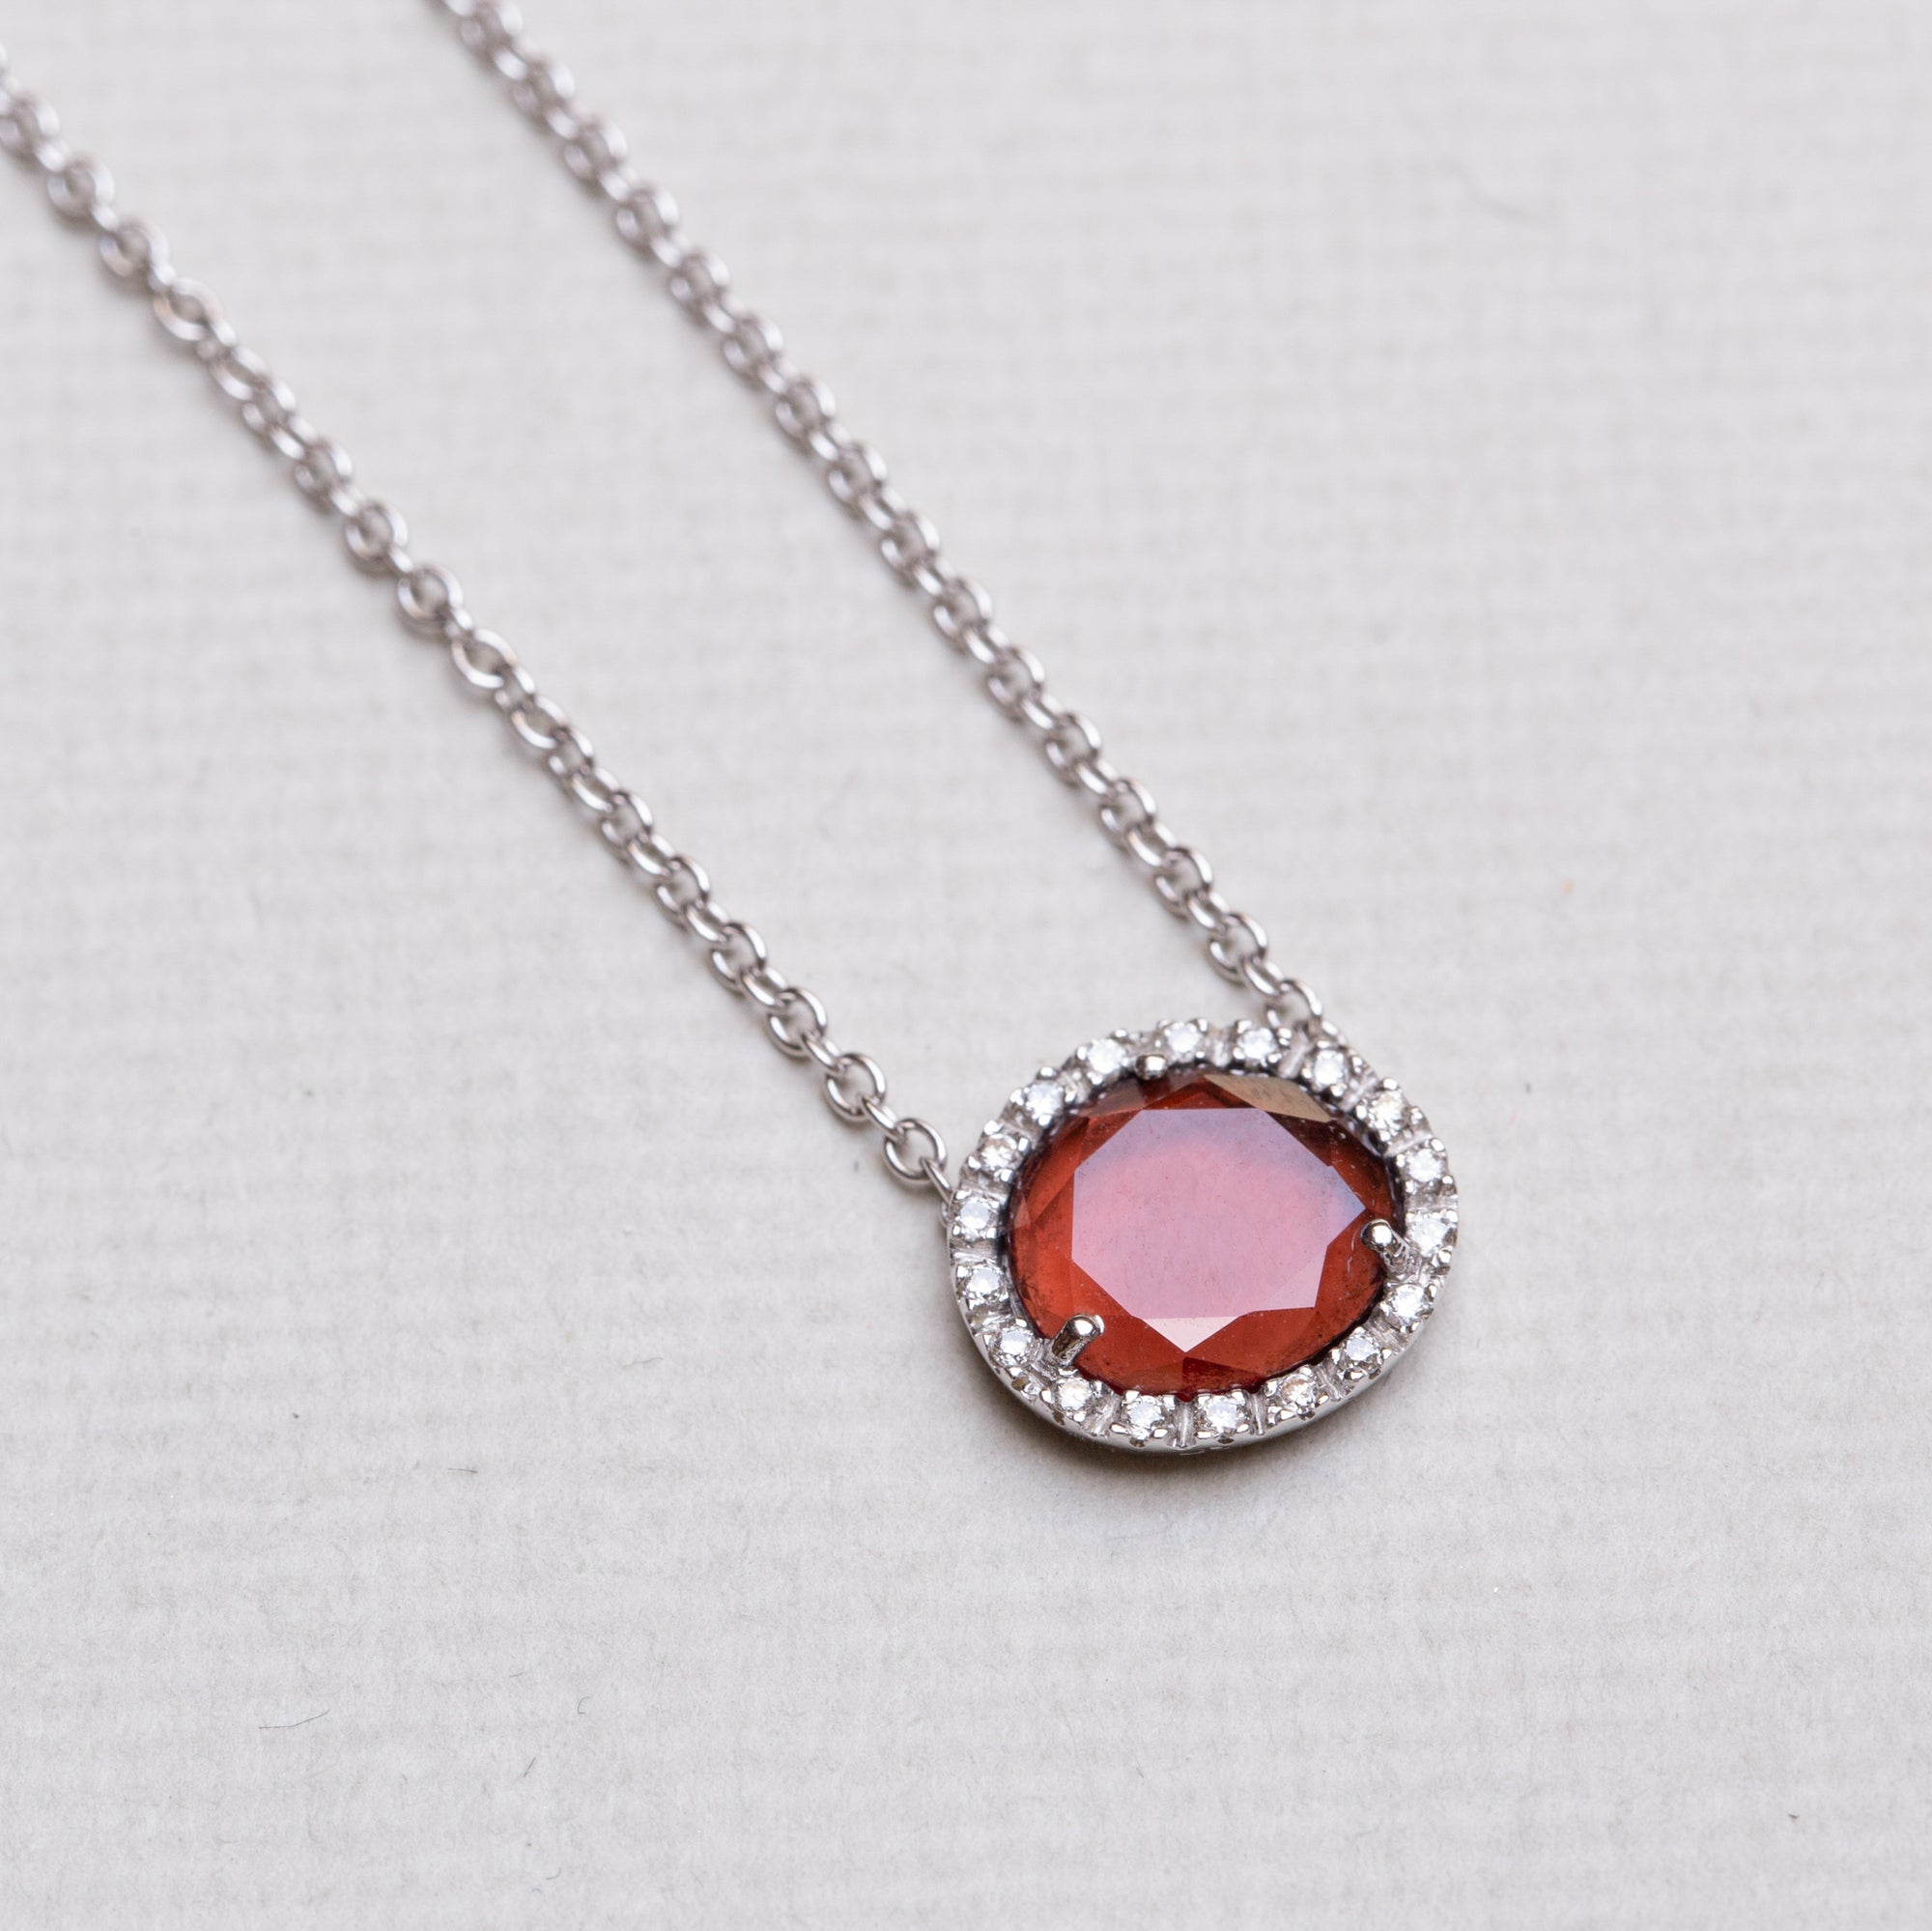 Vintage Pomellato White Gold Necklace with Garnet and Diamonds